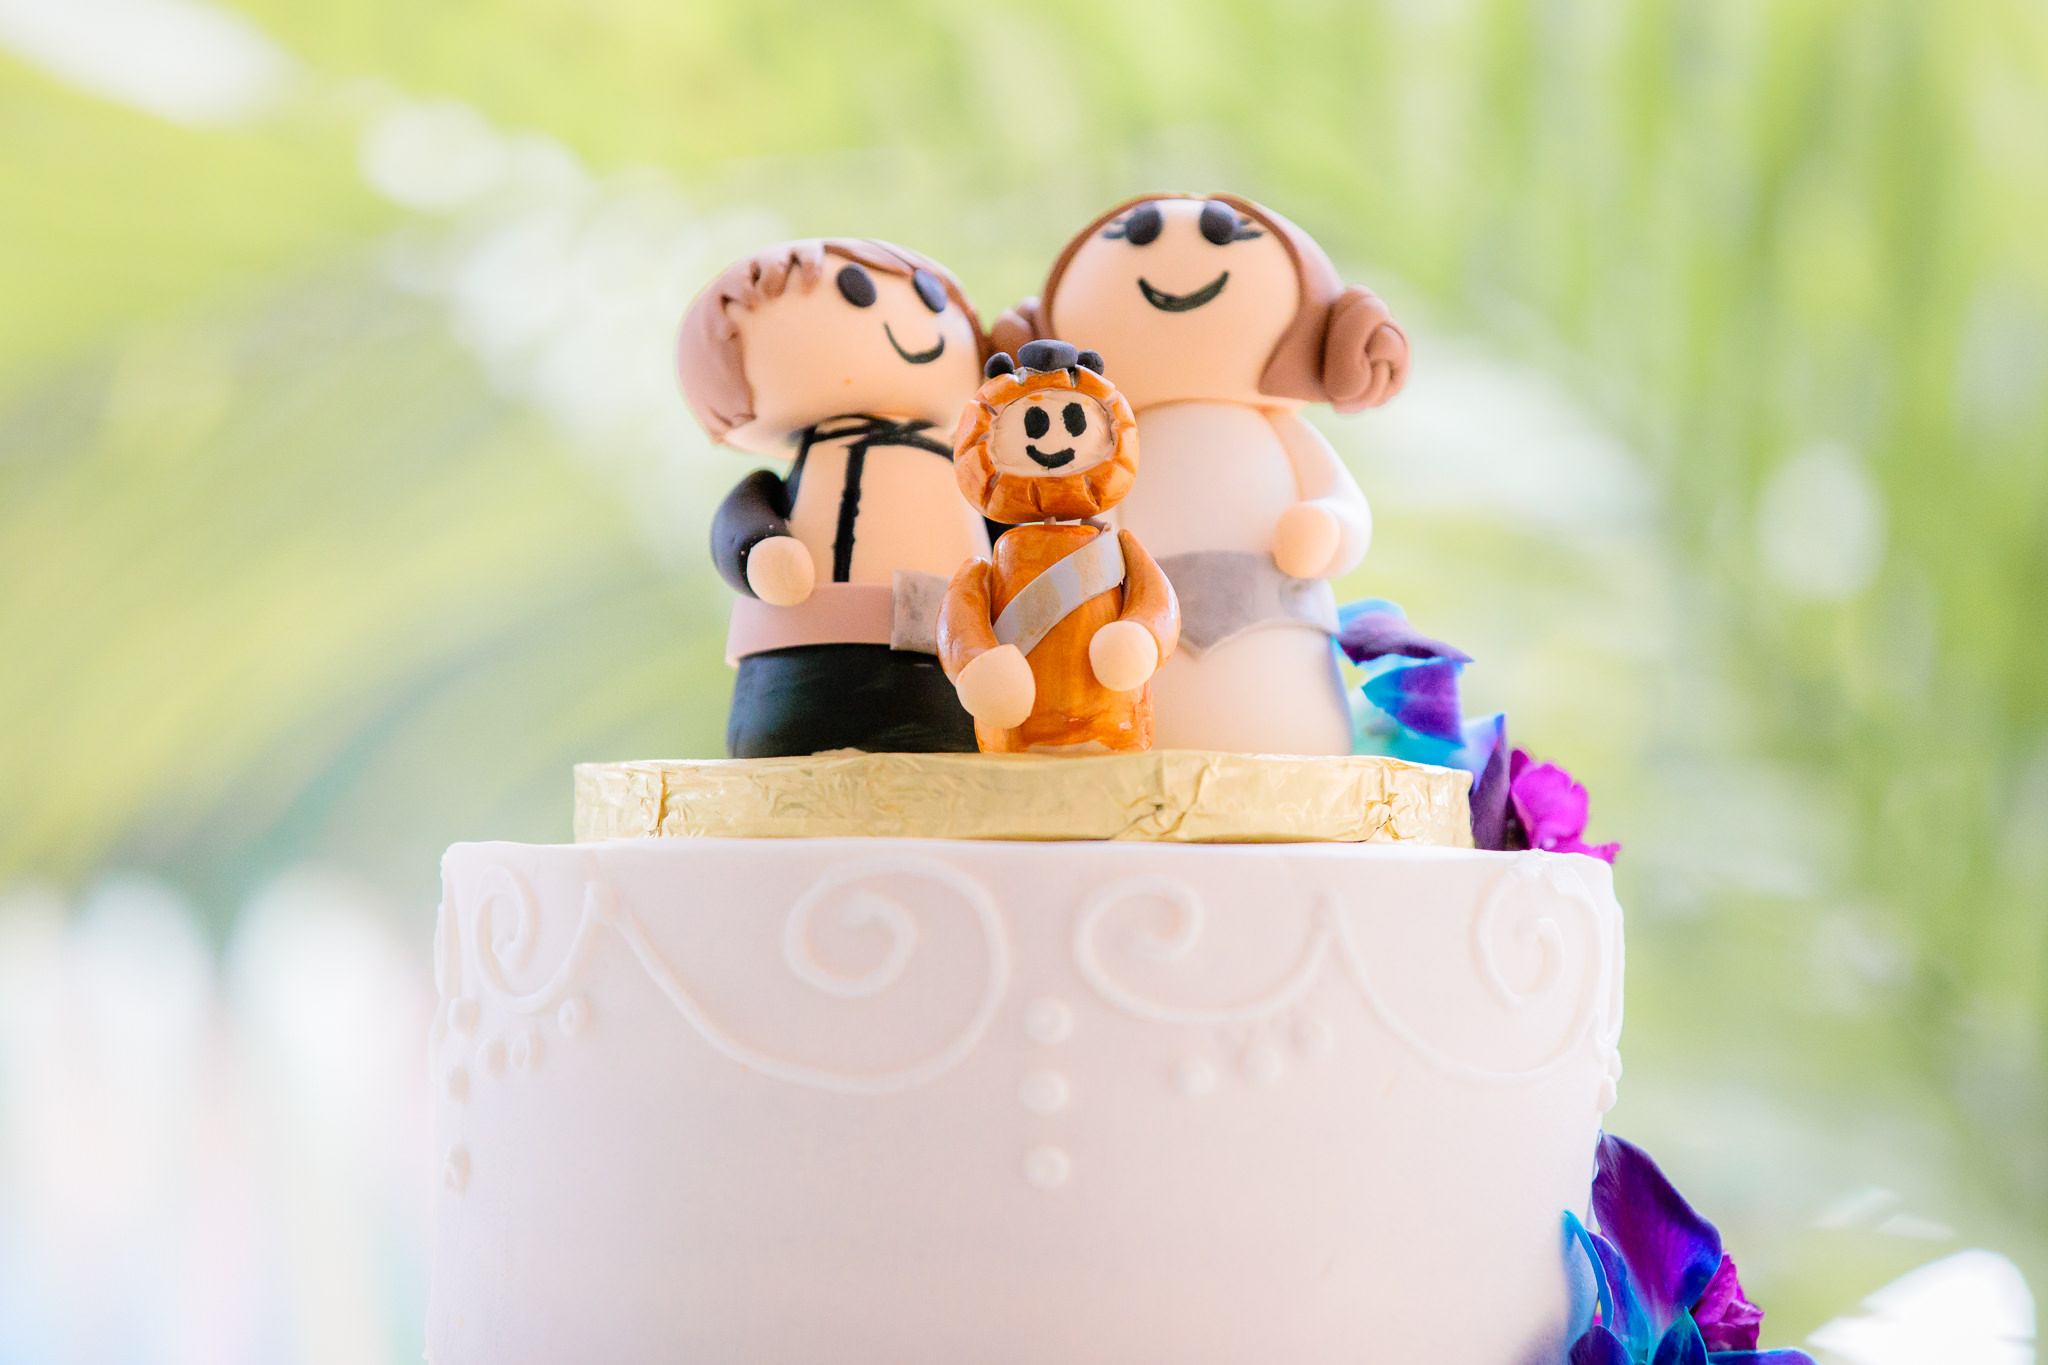 Star Wars cake topper at a National Aviary wedding reception